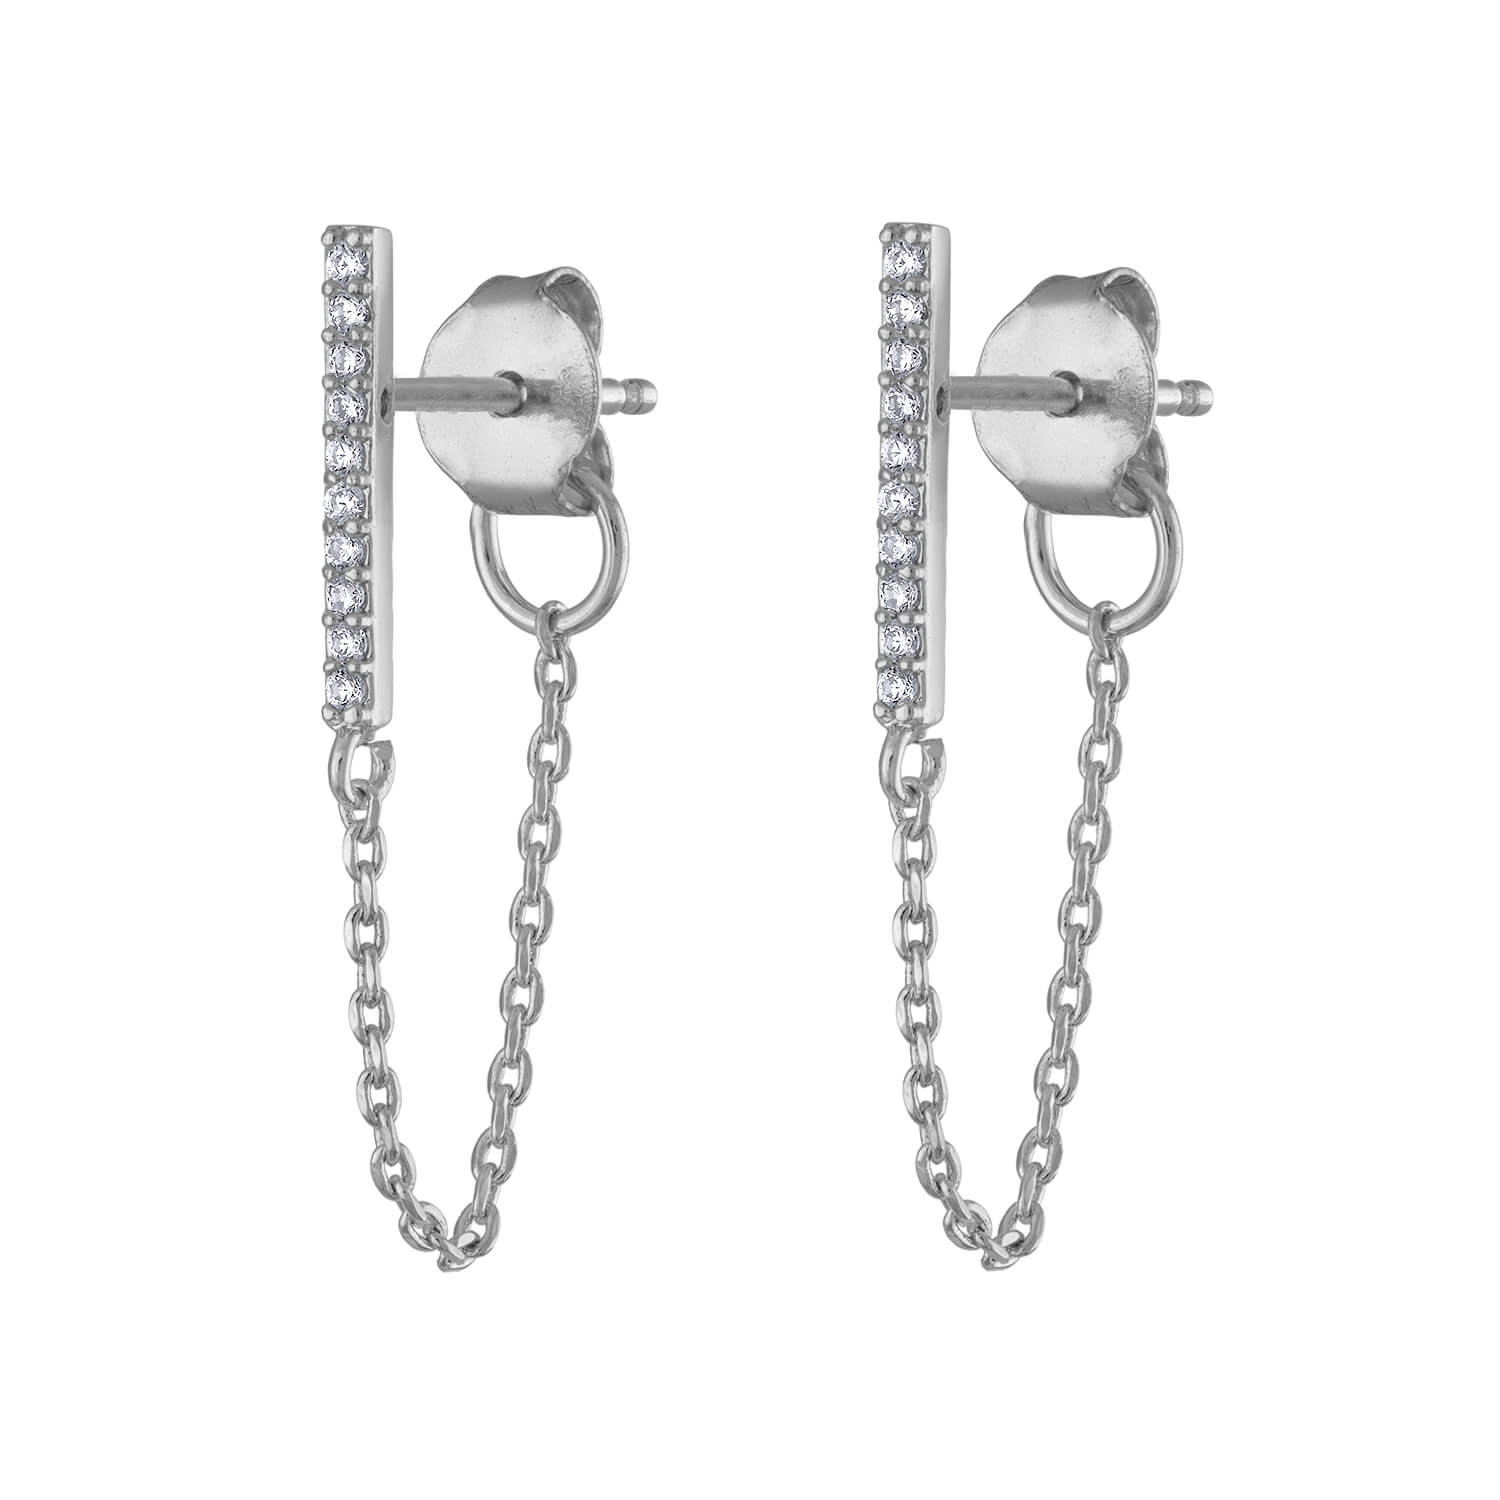 Nathis Chain Earrings By Sizzling Silver